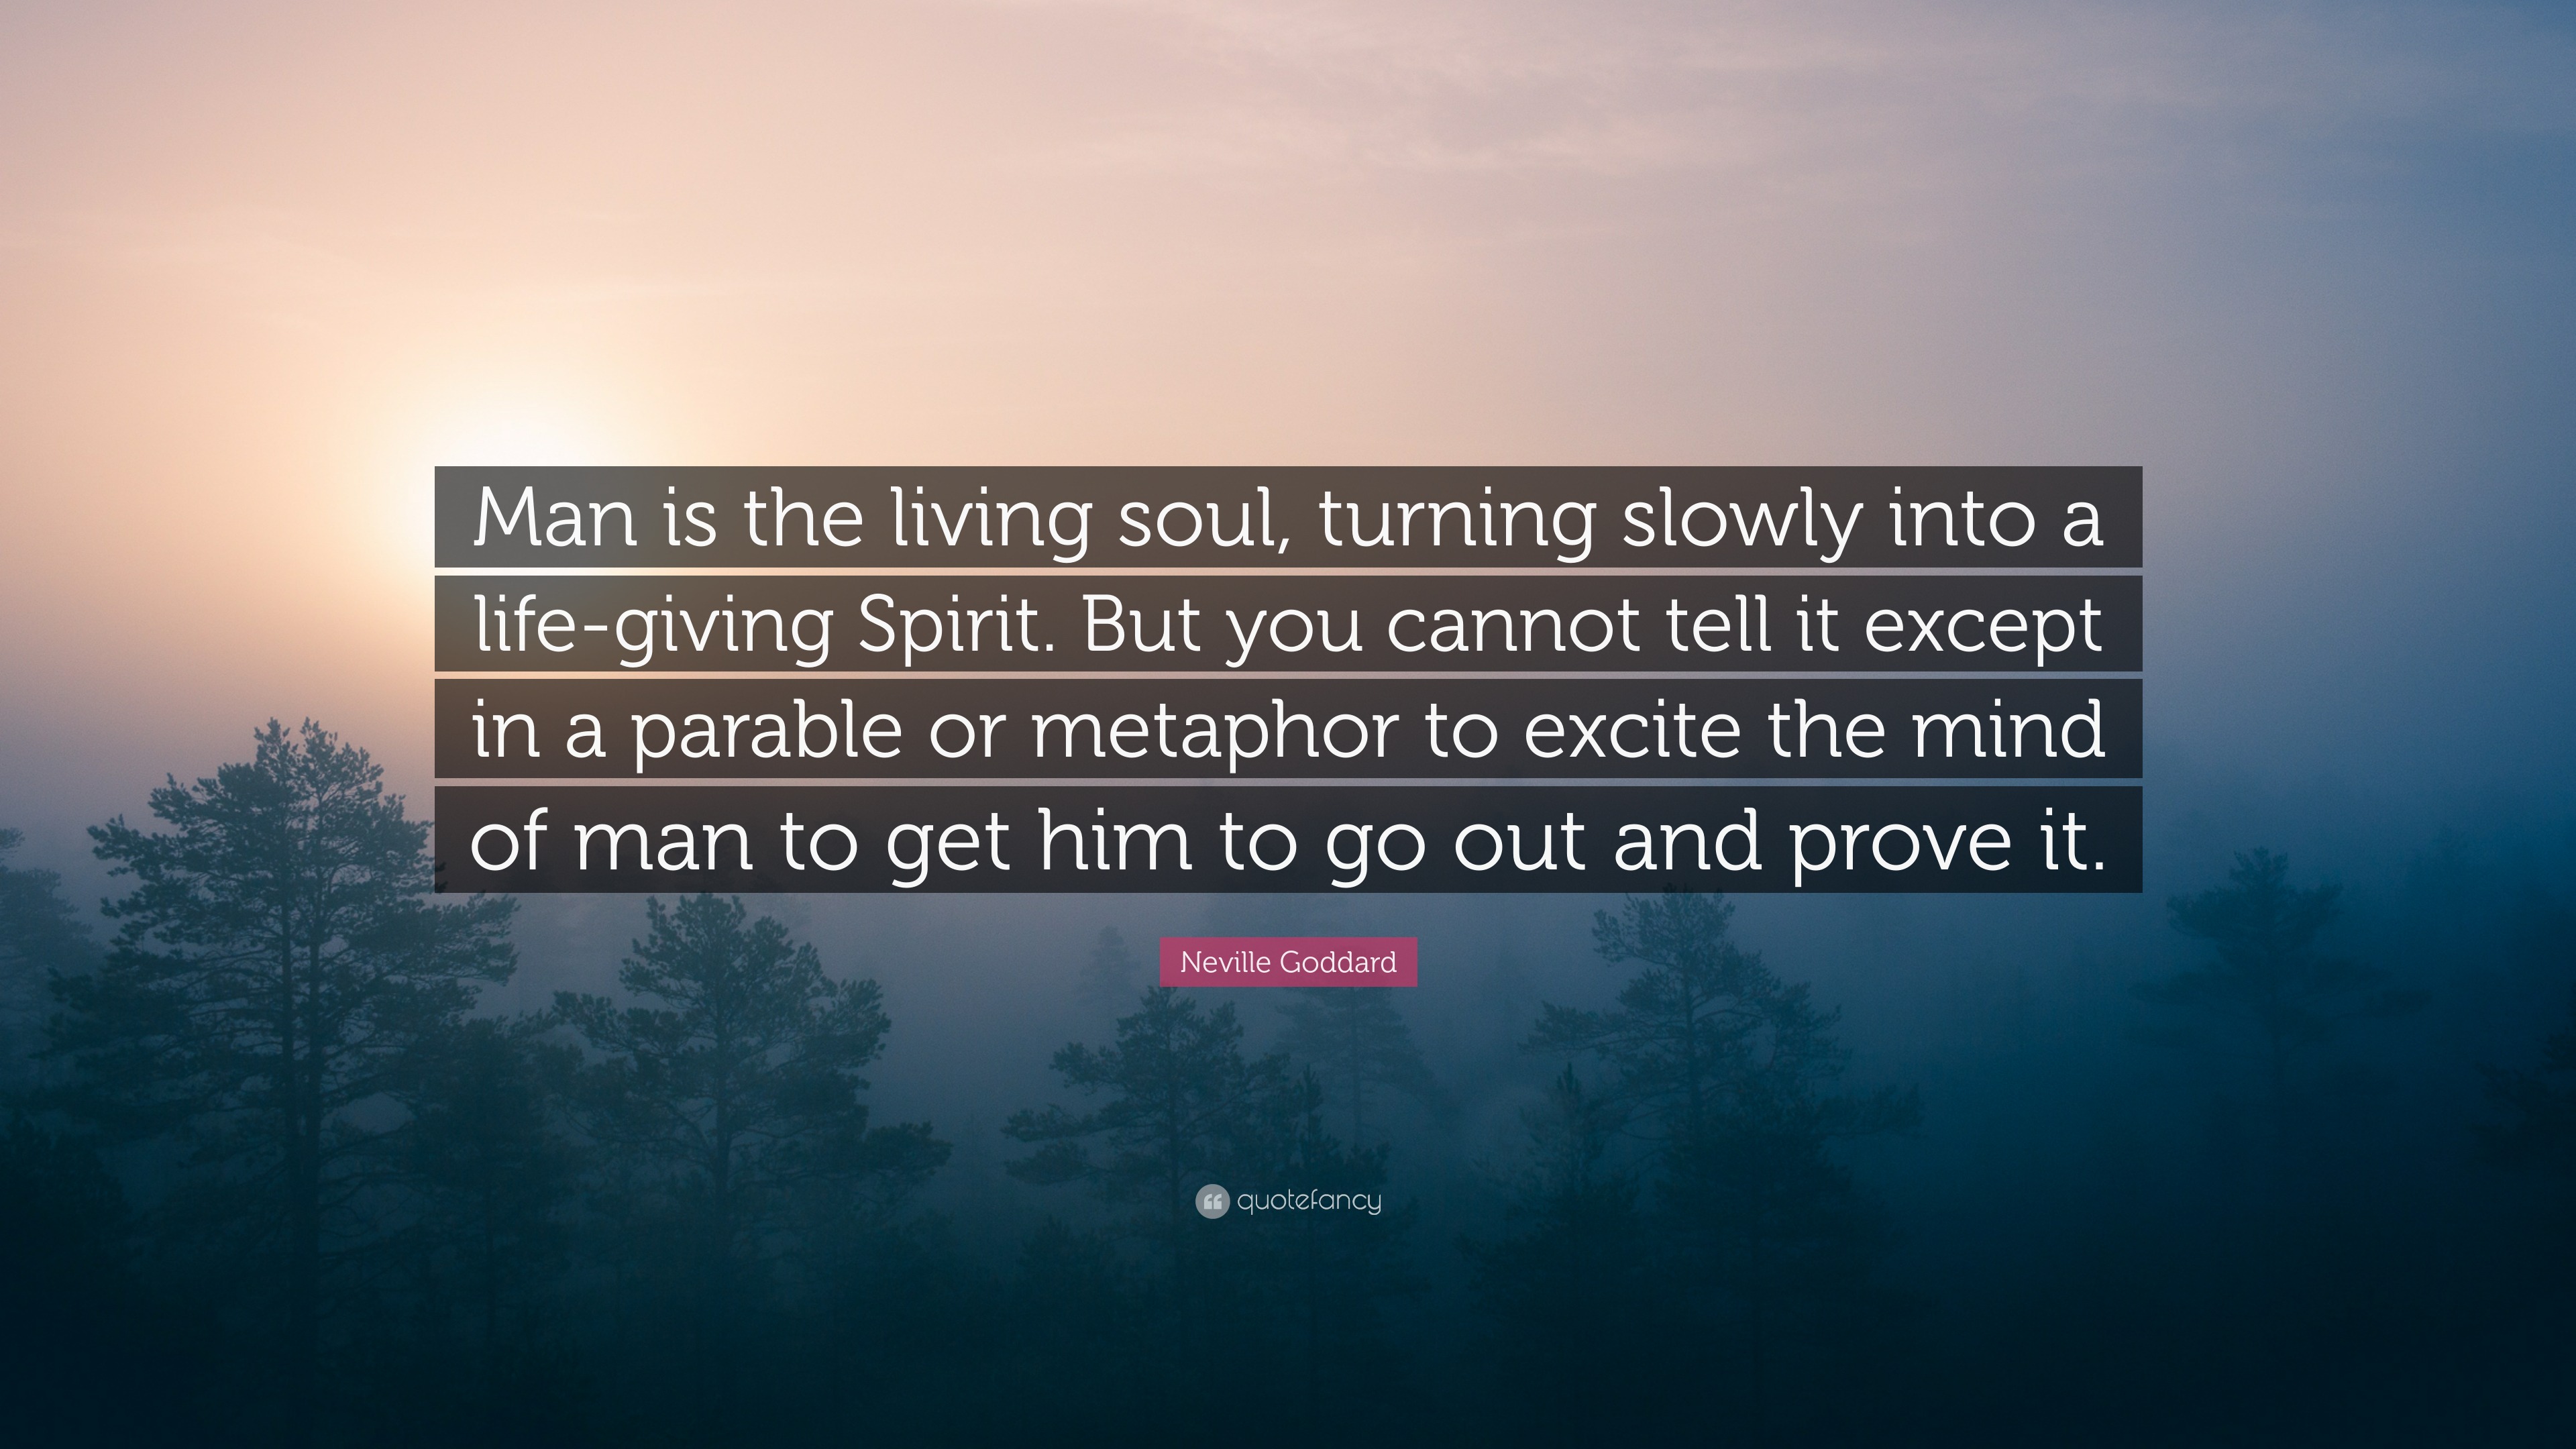 Neville Goddard Quote: “Man is the living soul, turning slowly into a ...